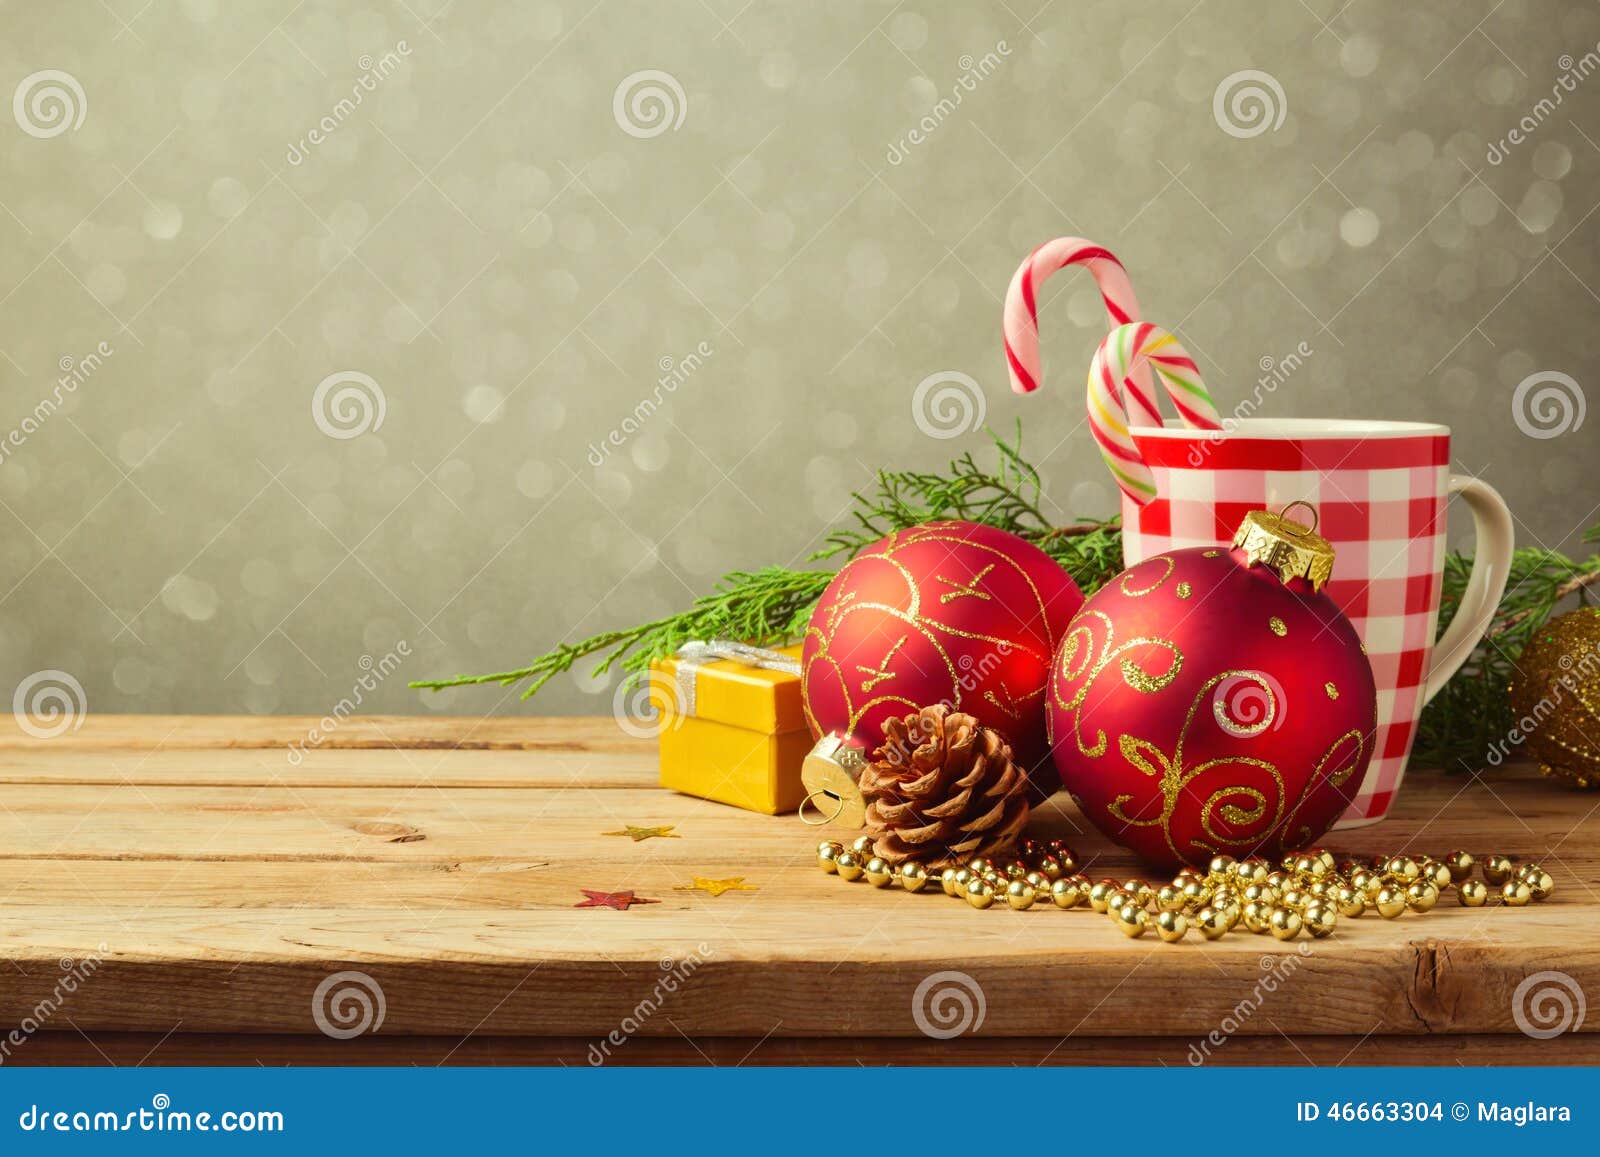 christmas holiday background with checked cup and decorations over blur dreamy background